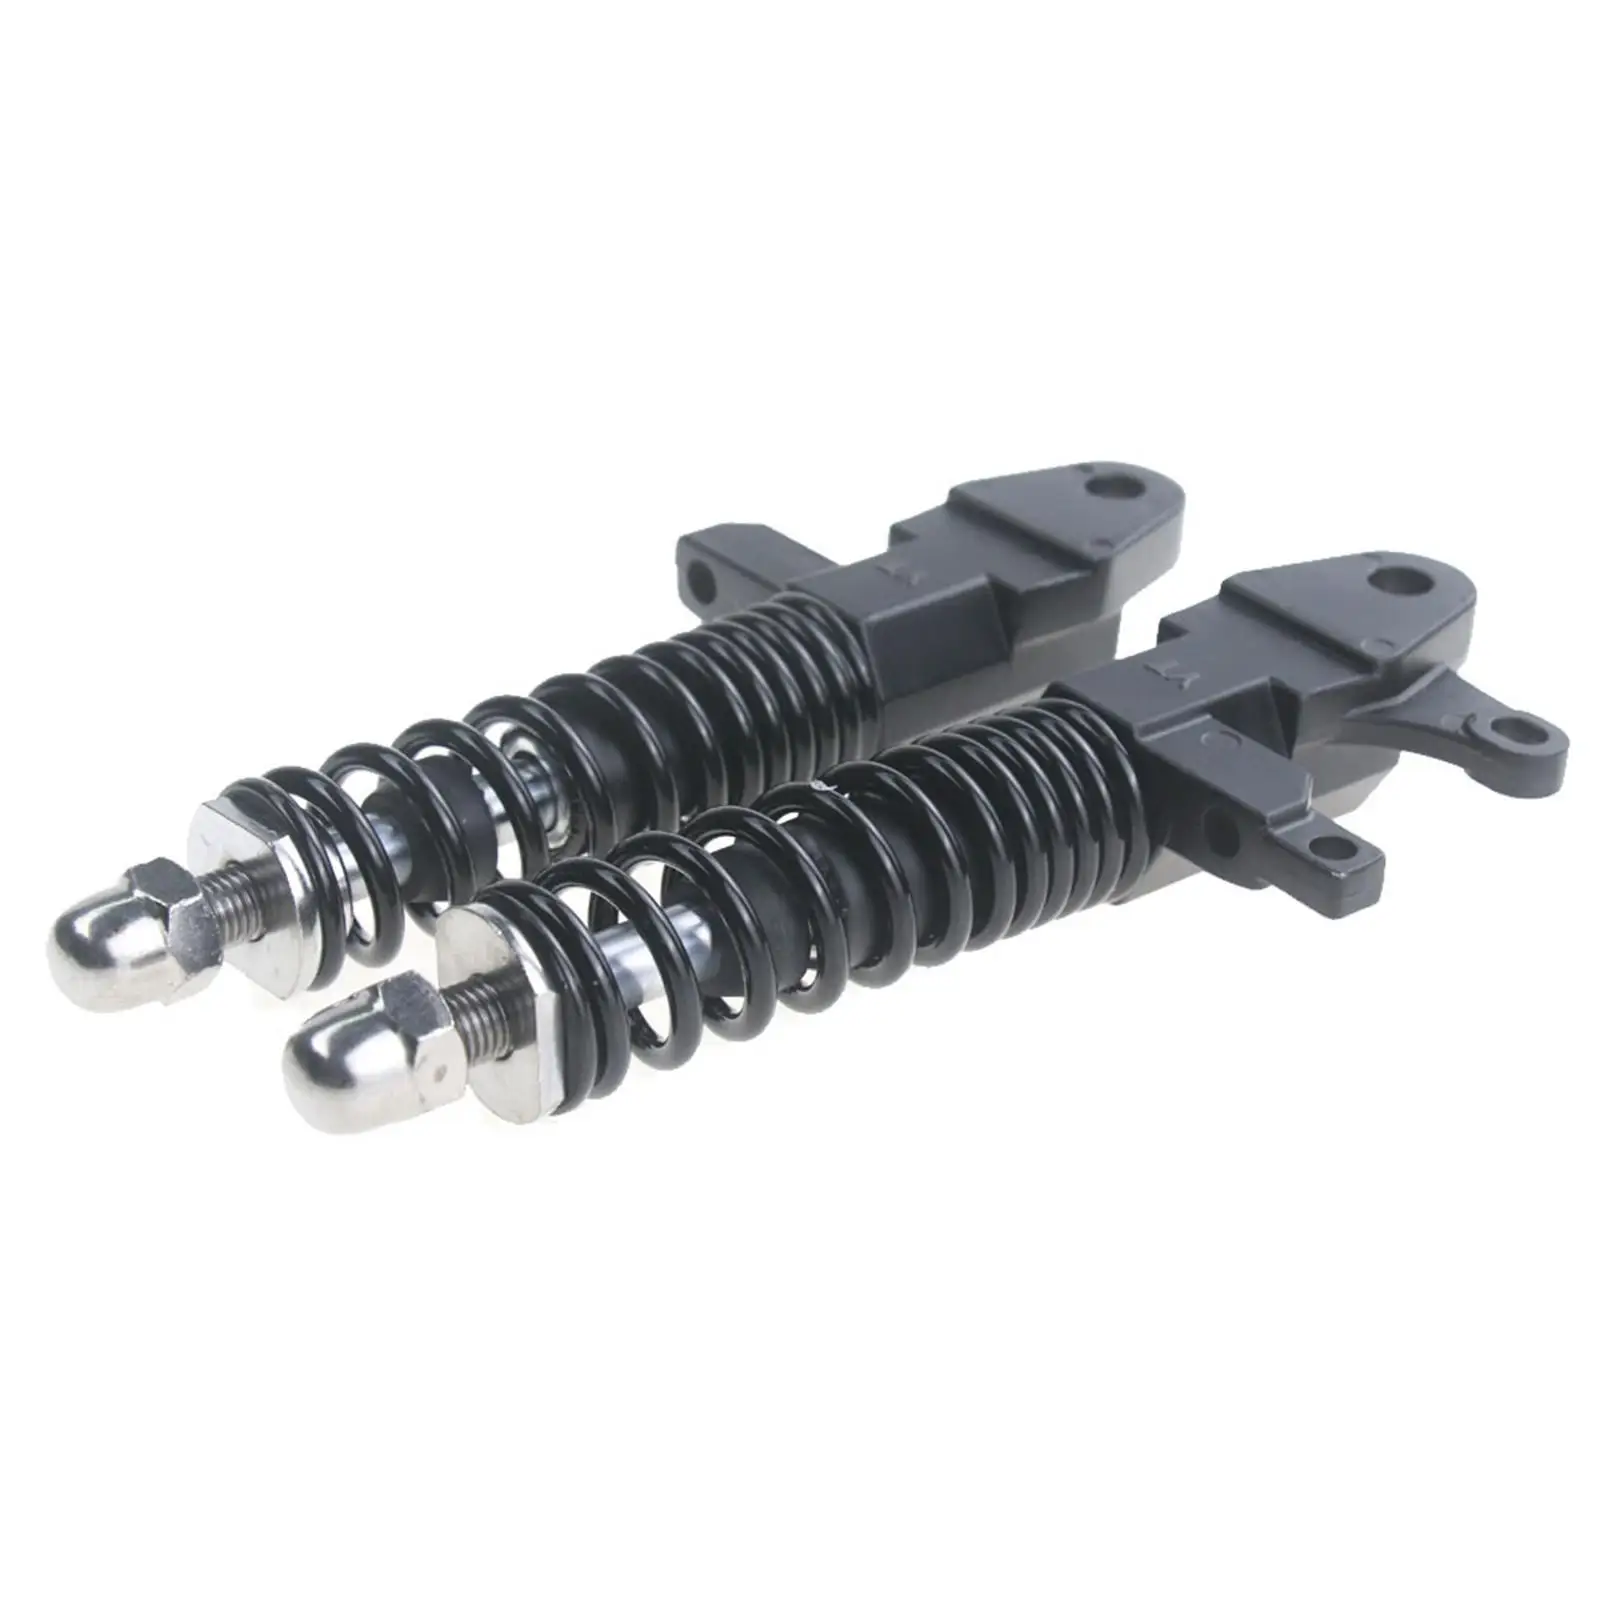 2 Pieces Front Fork Hydraulic Shock Absorber Reduce Noise 10inch Durable Cycling Parts Durable Black for Kugoo M12 M4 Pro